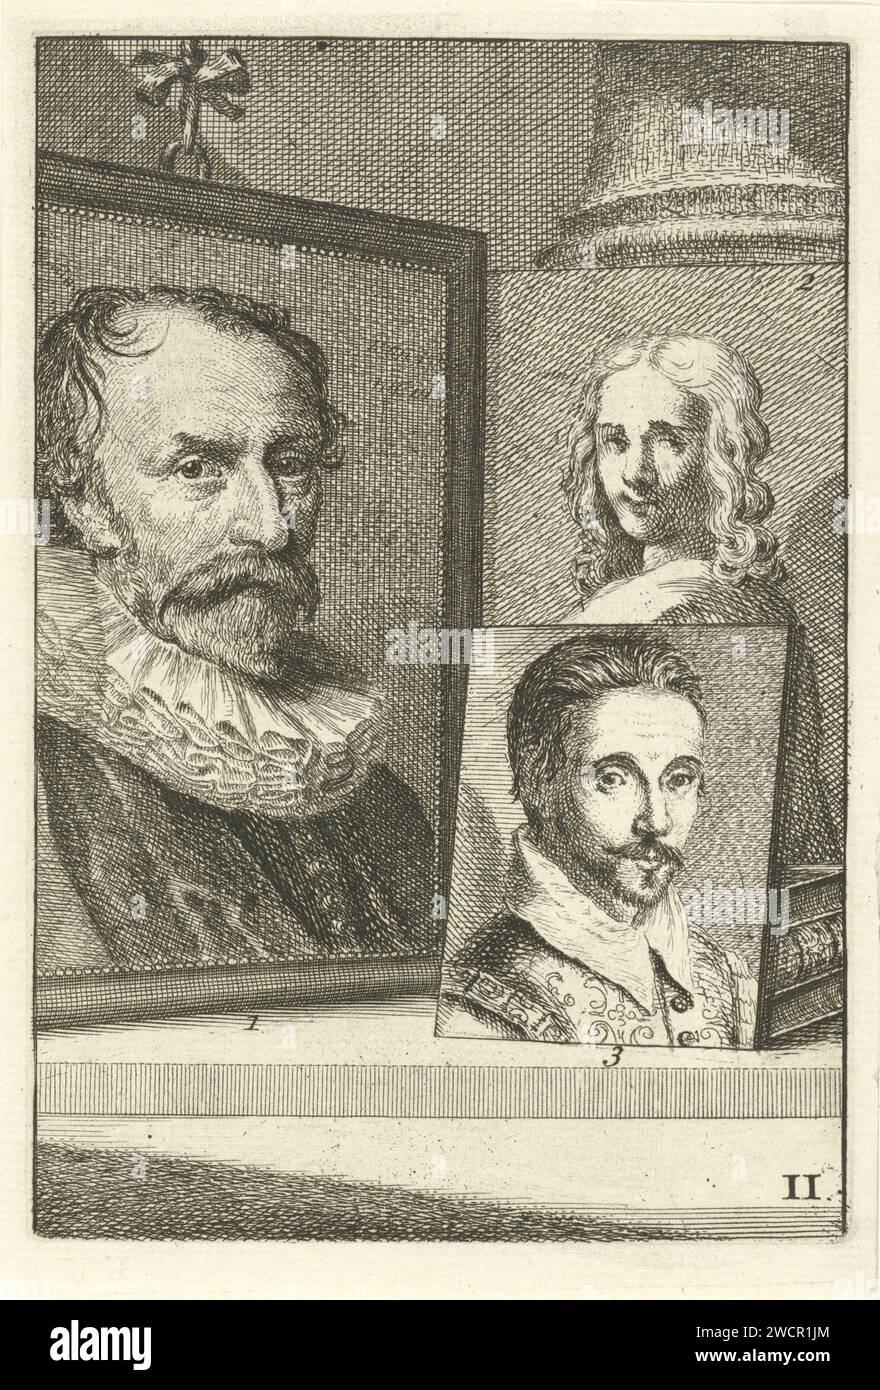 Portraits of Michiel Jansz. van Mierevelt, a non -identified person and Willem Jacobsz. Delff, Jan L'Admiral, 1764 print Three numbered artist portraits. Portrait of Michiel Jansz. van Mierevelt (no. 1), an un identified person (no. 2) and Willem Jacobsz. Delff (no. 3). Print marked at the bottom right: II.  paper etching Stock Photo